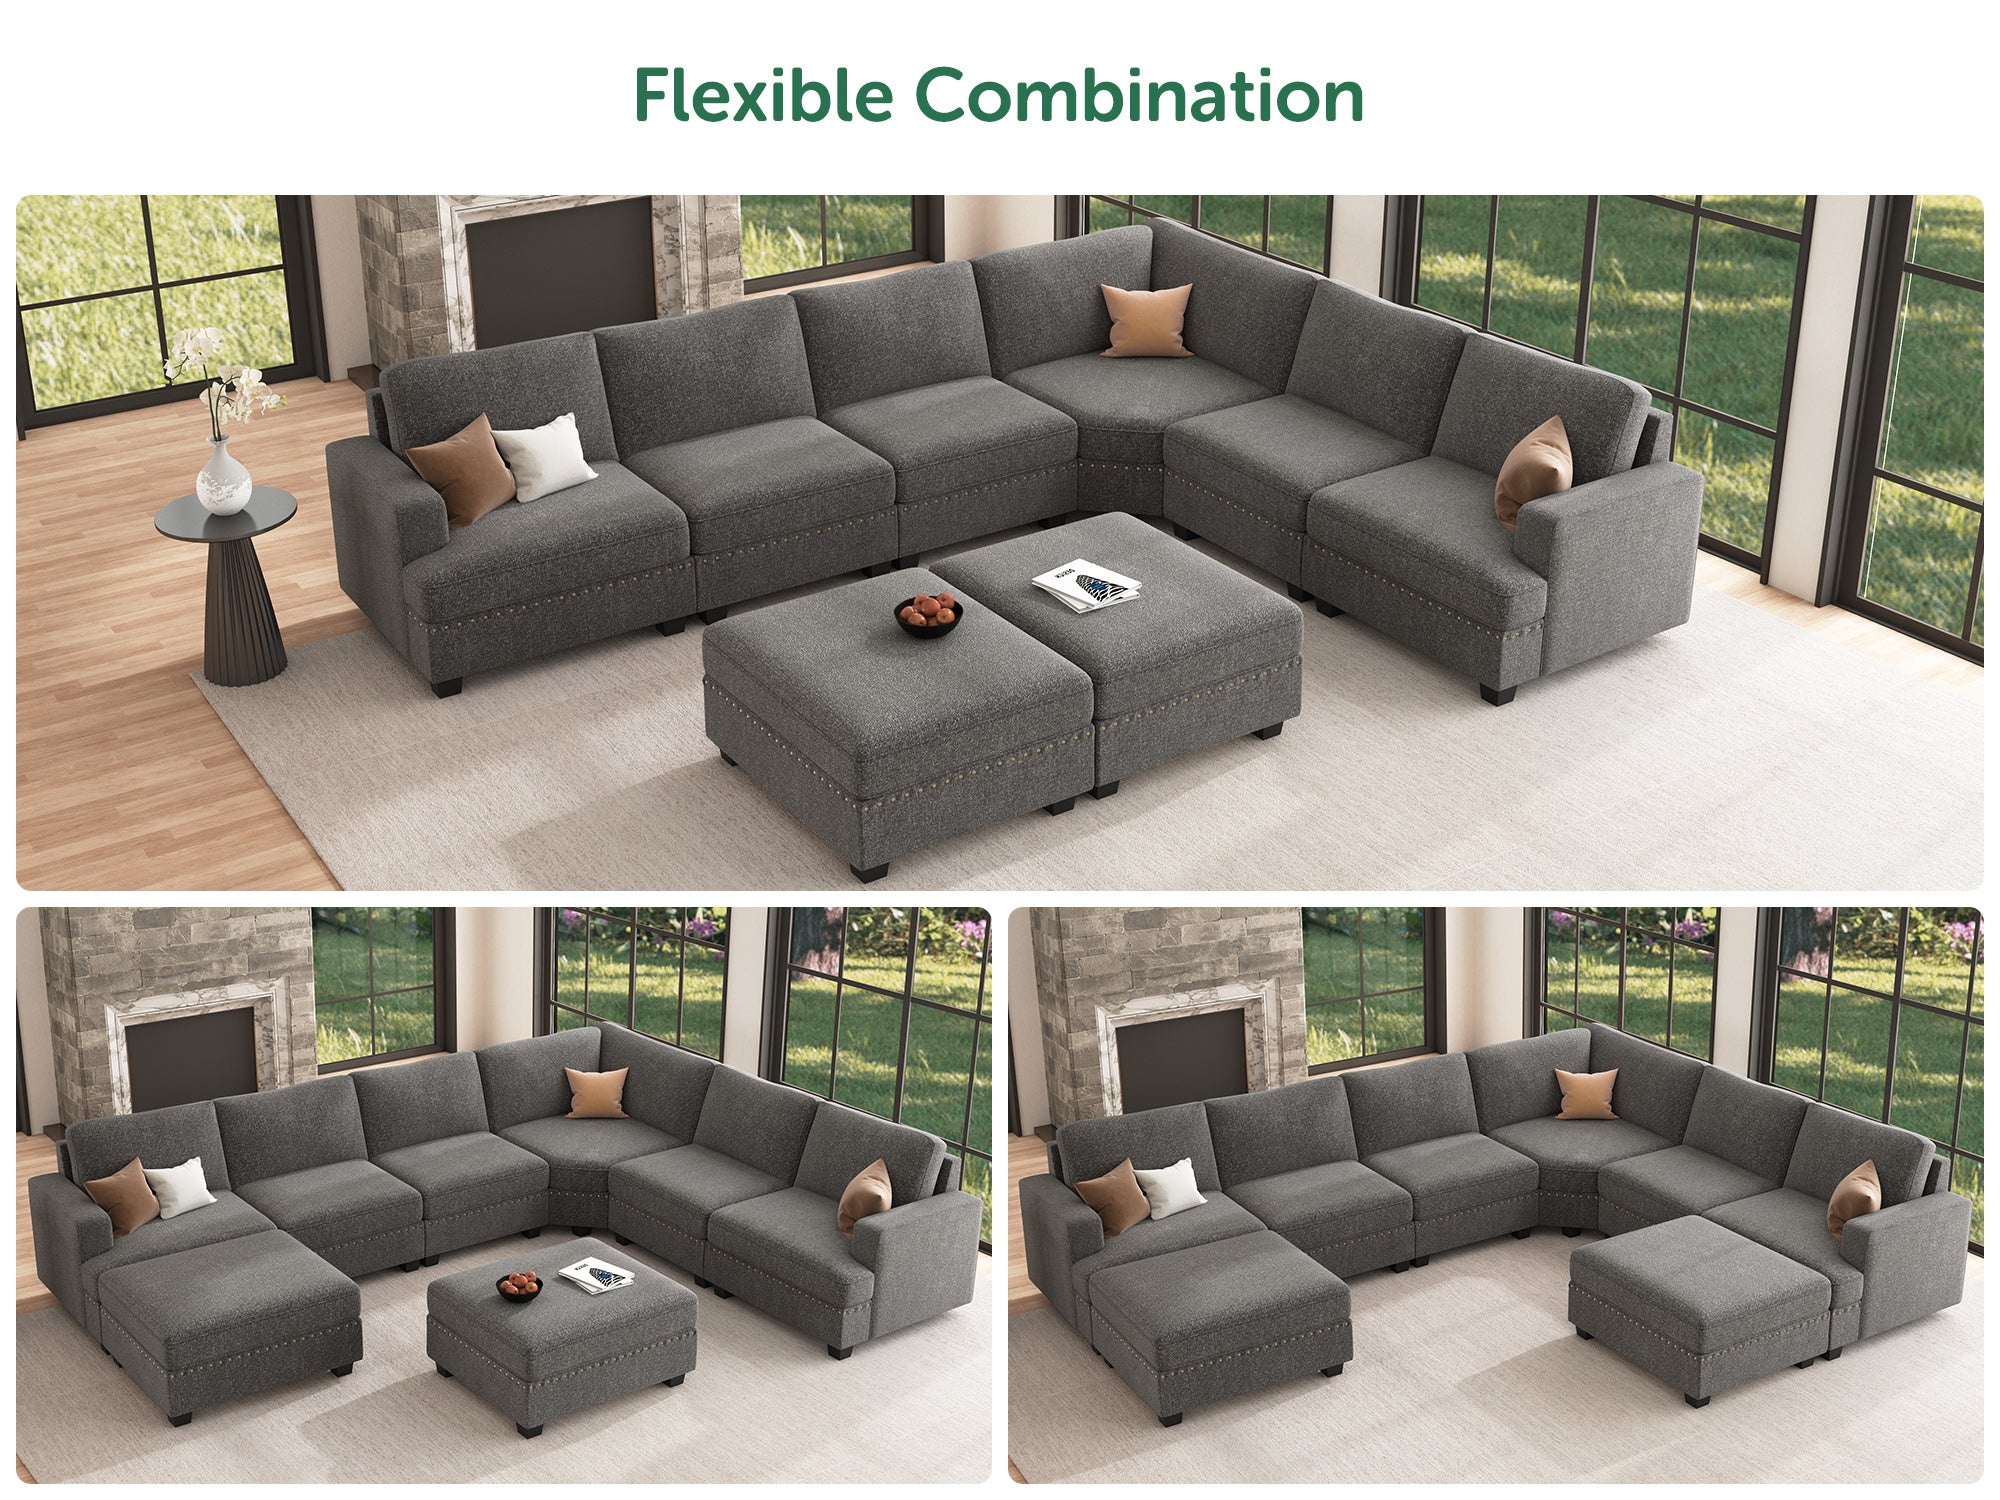 HONBAY 6-Seat Corner Modular Sofa Oversized Sectional Sofa Couch with Two Storage Reversible Ottoman #Color_Light Grey